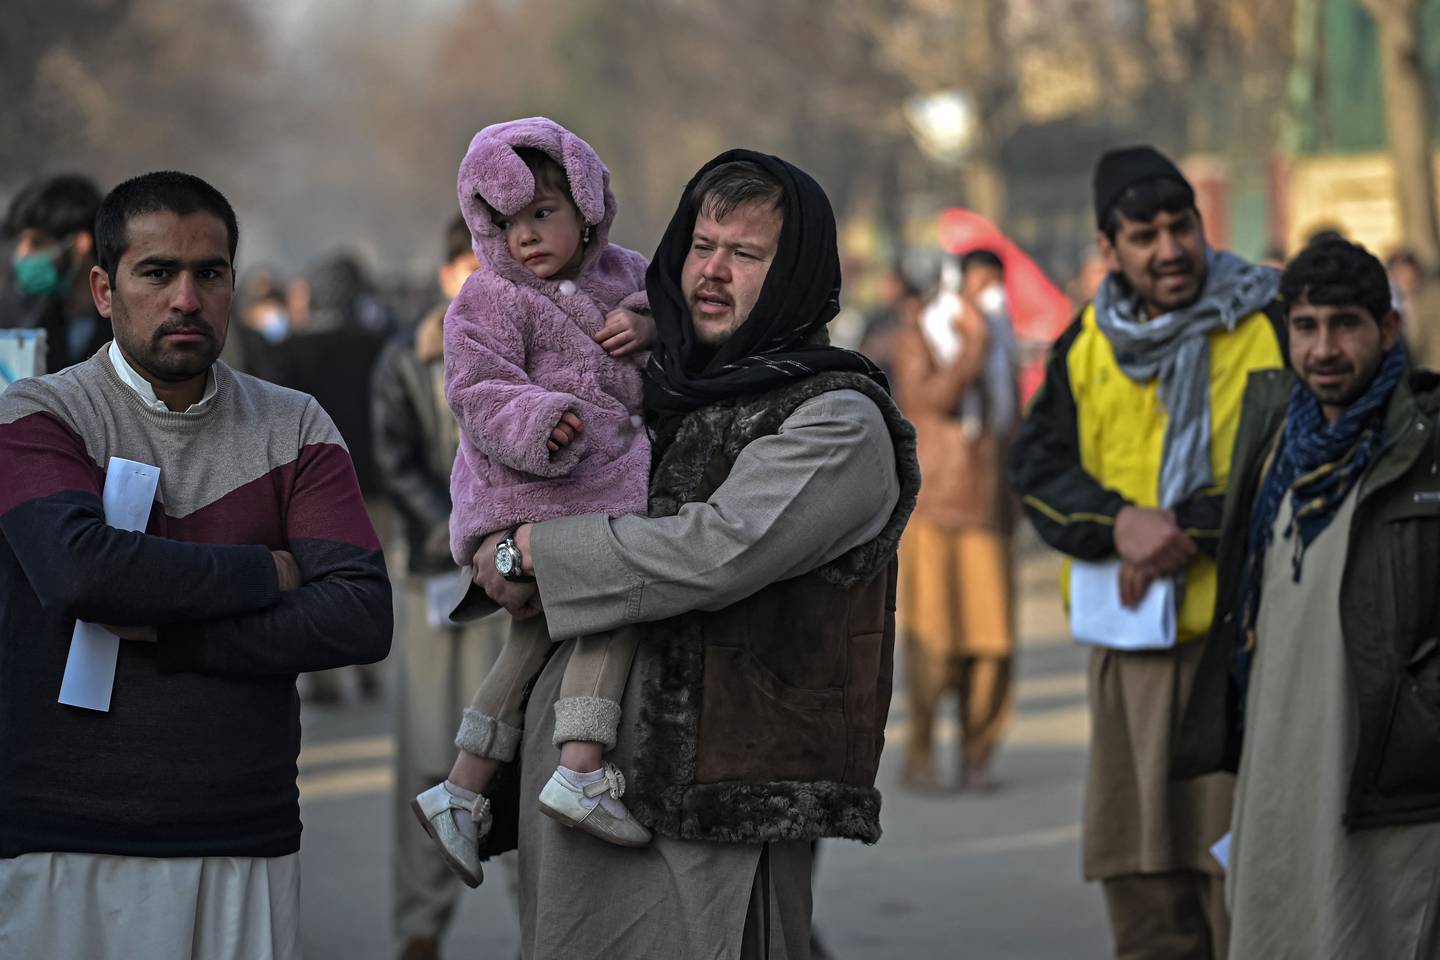 A man carries his daughter as people queue to enter the passport office at a checkpoint in Kabul on December 19, after Afghanistan's Taliban authorities said they will resume issuing passports. AFP